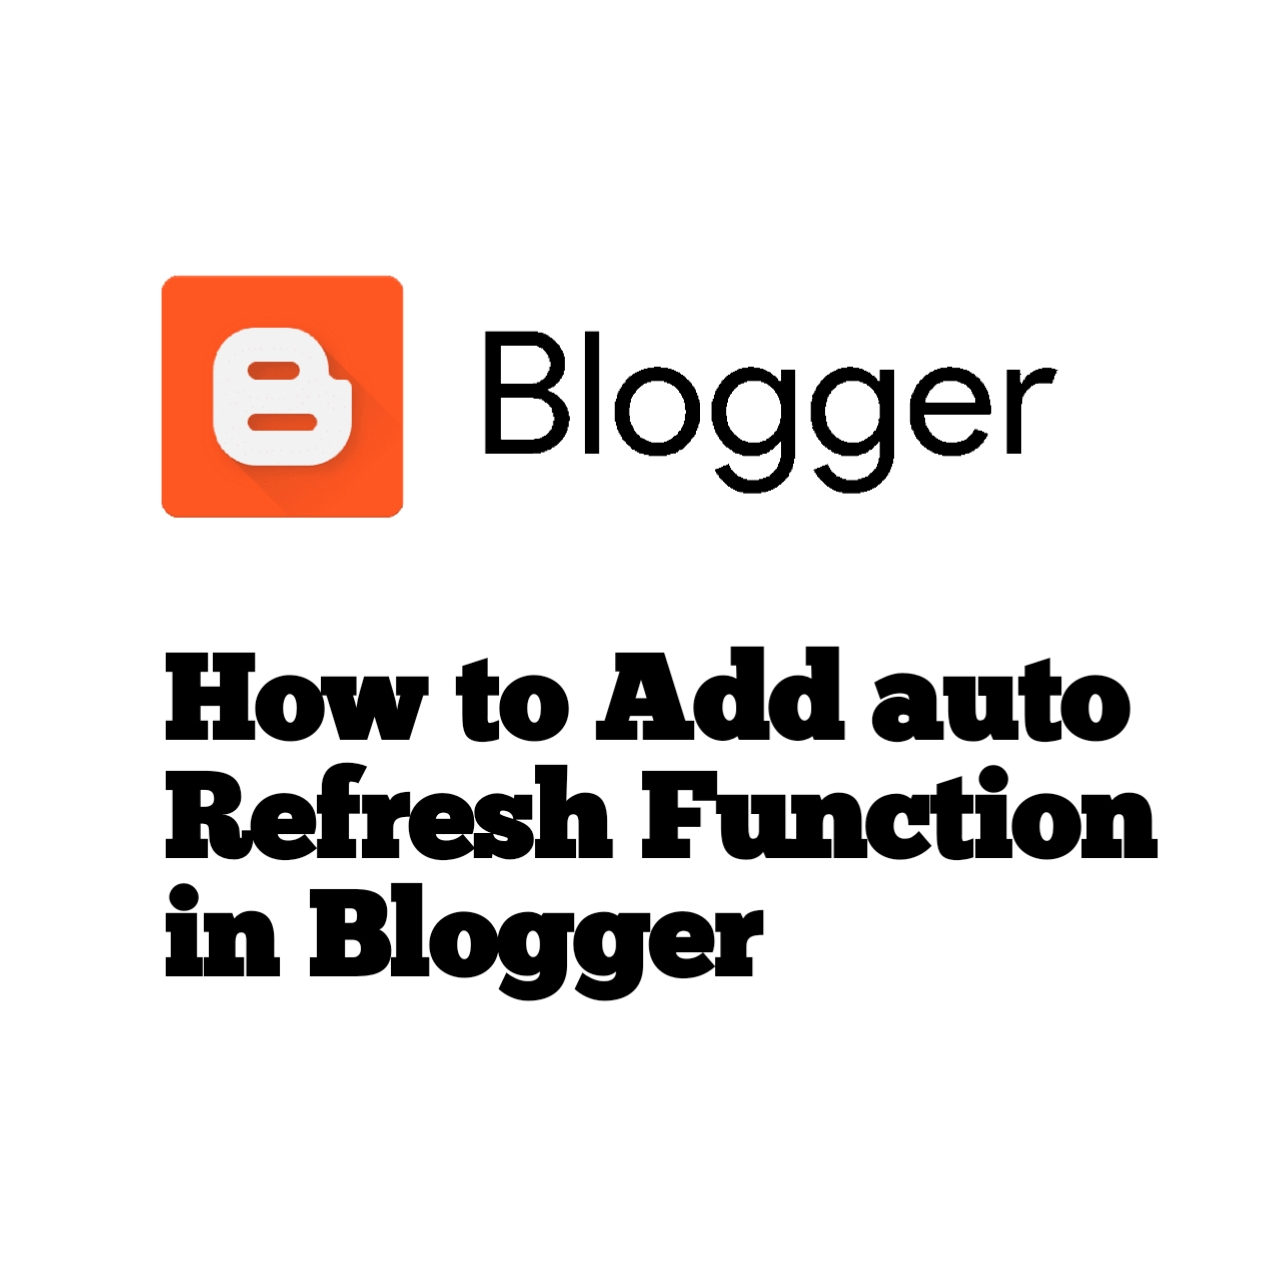 How to add auto Refresh Function in Blogger? Blogger Tips 2022